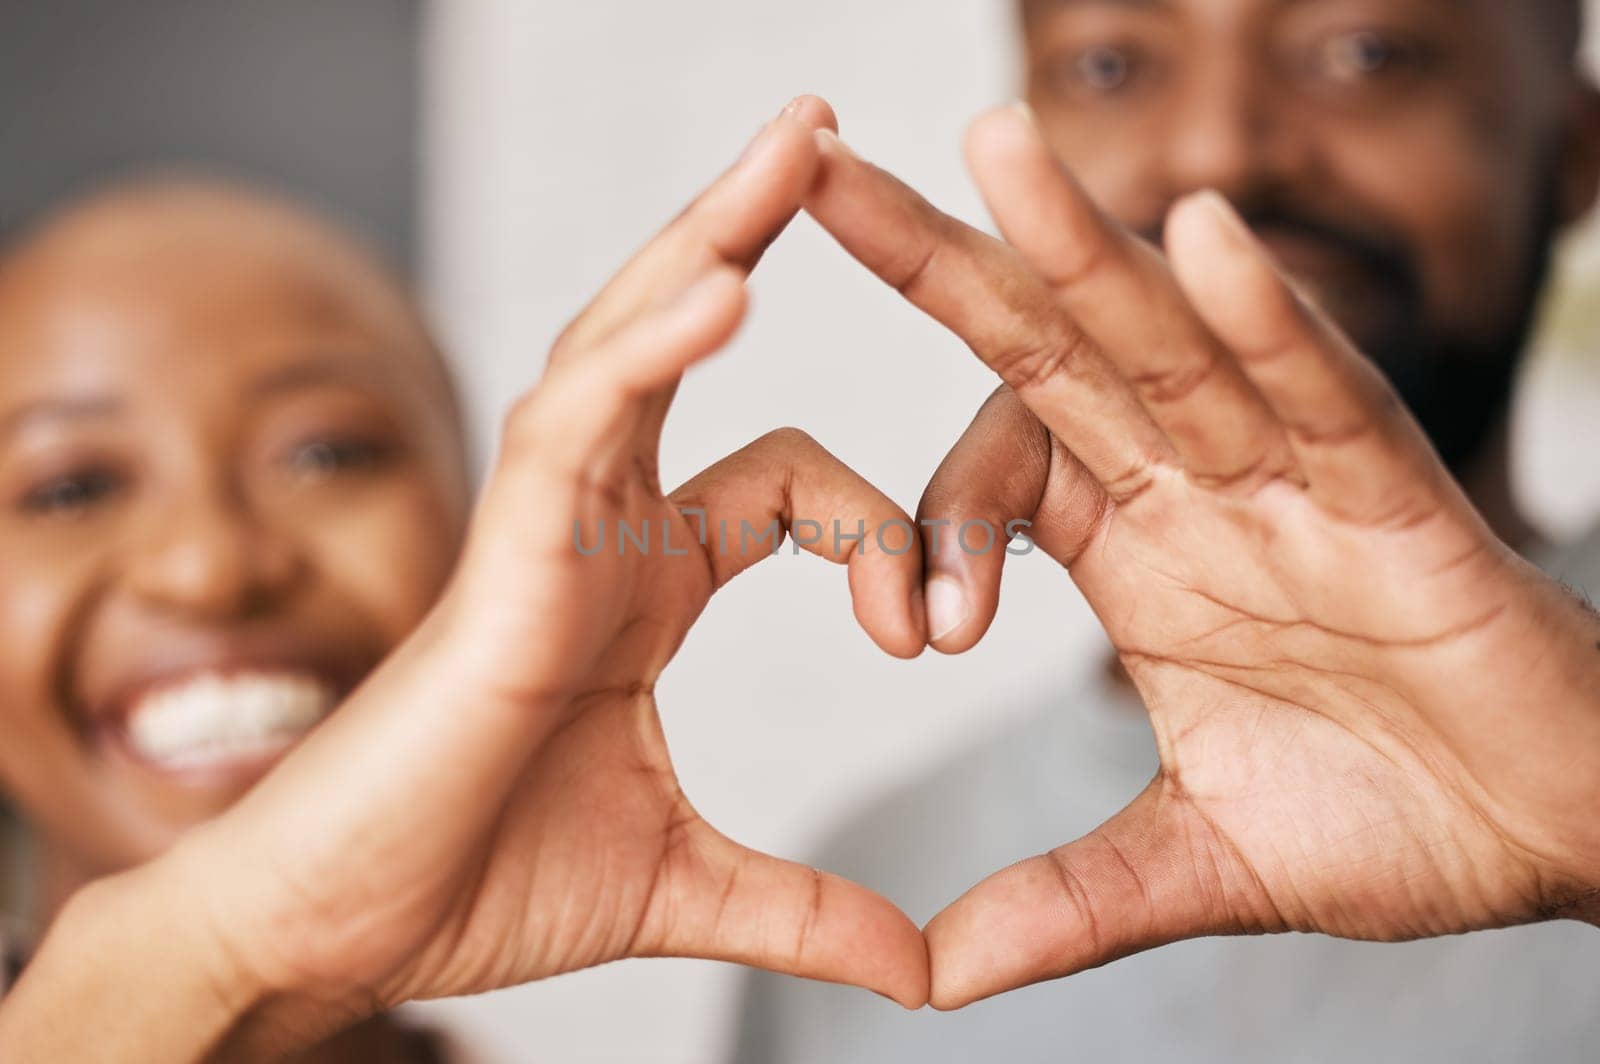 Happy, hands in heart and black couple with smile for relationship, dating and commitment in home. Love, emoji sign and face of black woman and man with hand shape for bonding, romance and trust by YuriArcurs